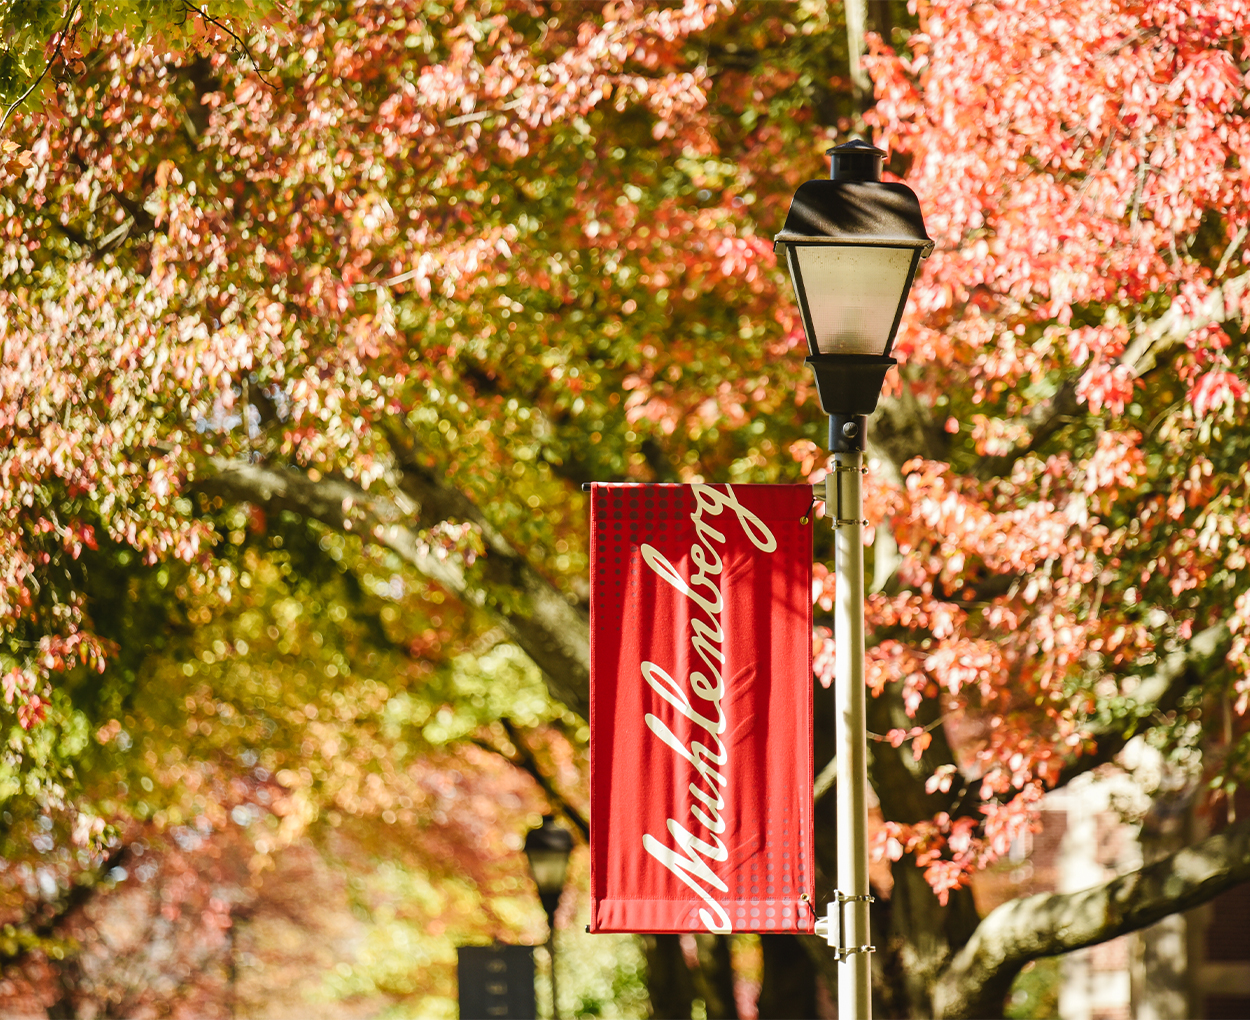 A red banner that reads Muhlenberg hangs on a lampost, surrounded by brightly-colored fall foliage.